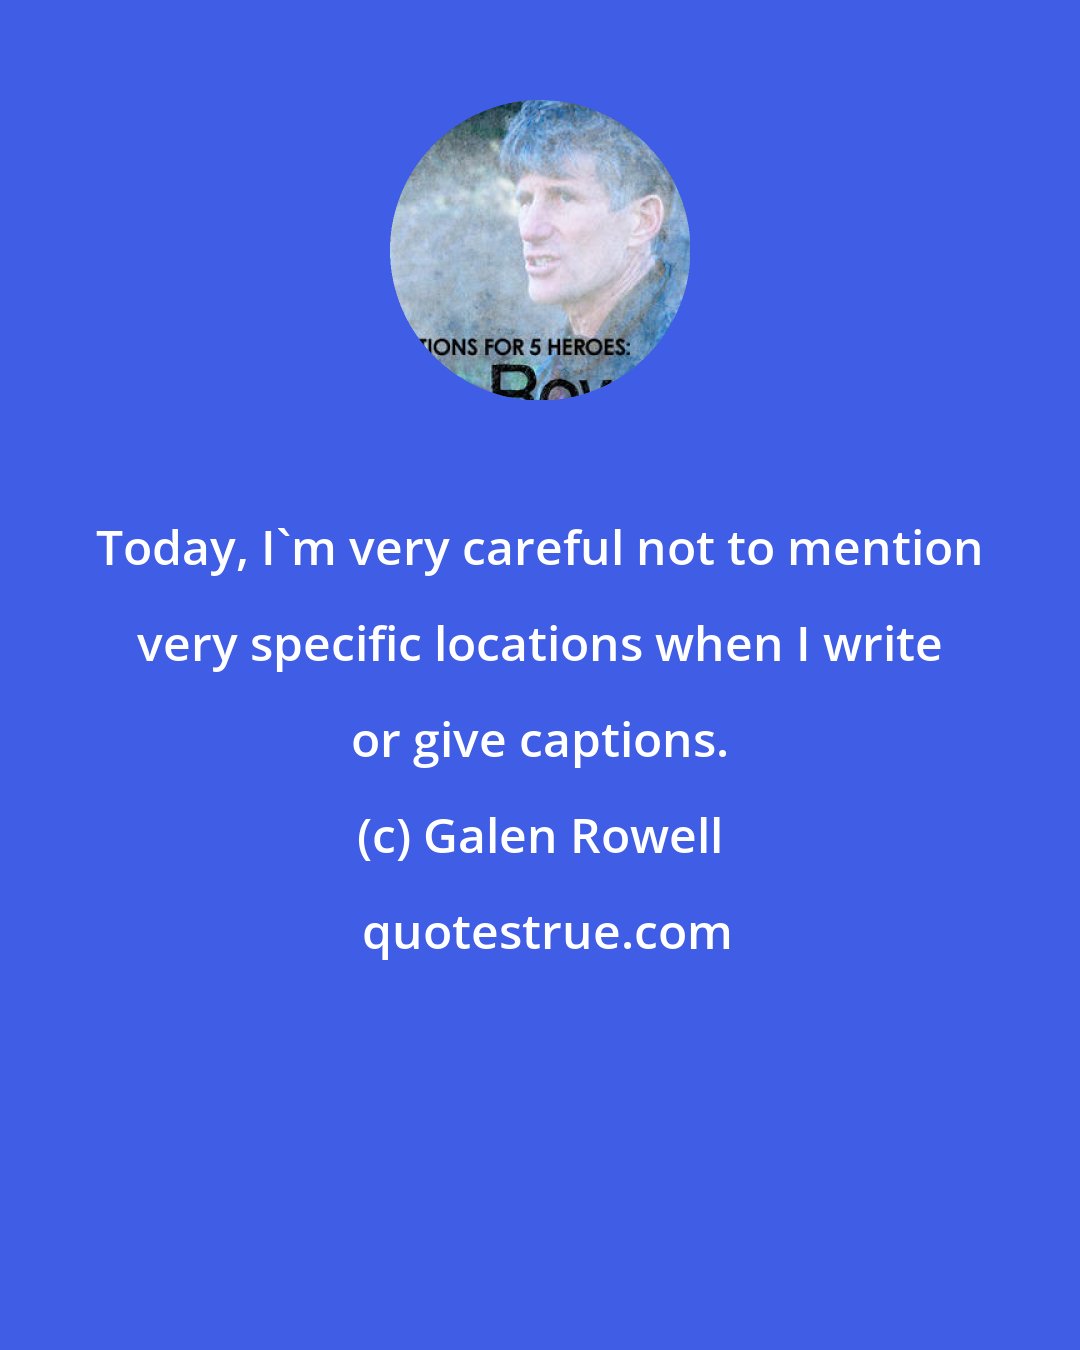 Galen Rowell: Today, I'm very careful not to mention very specific locations when I write or give captions.